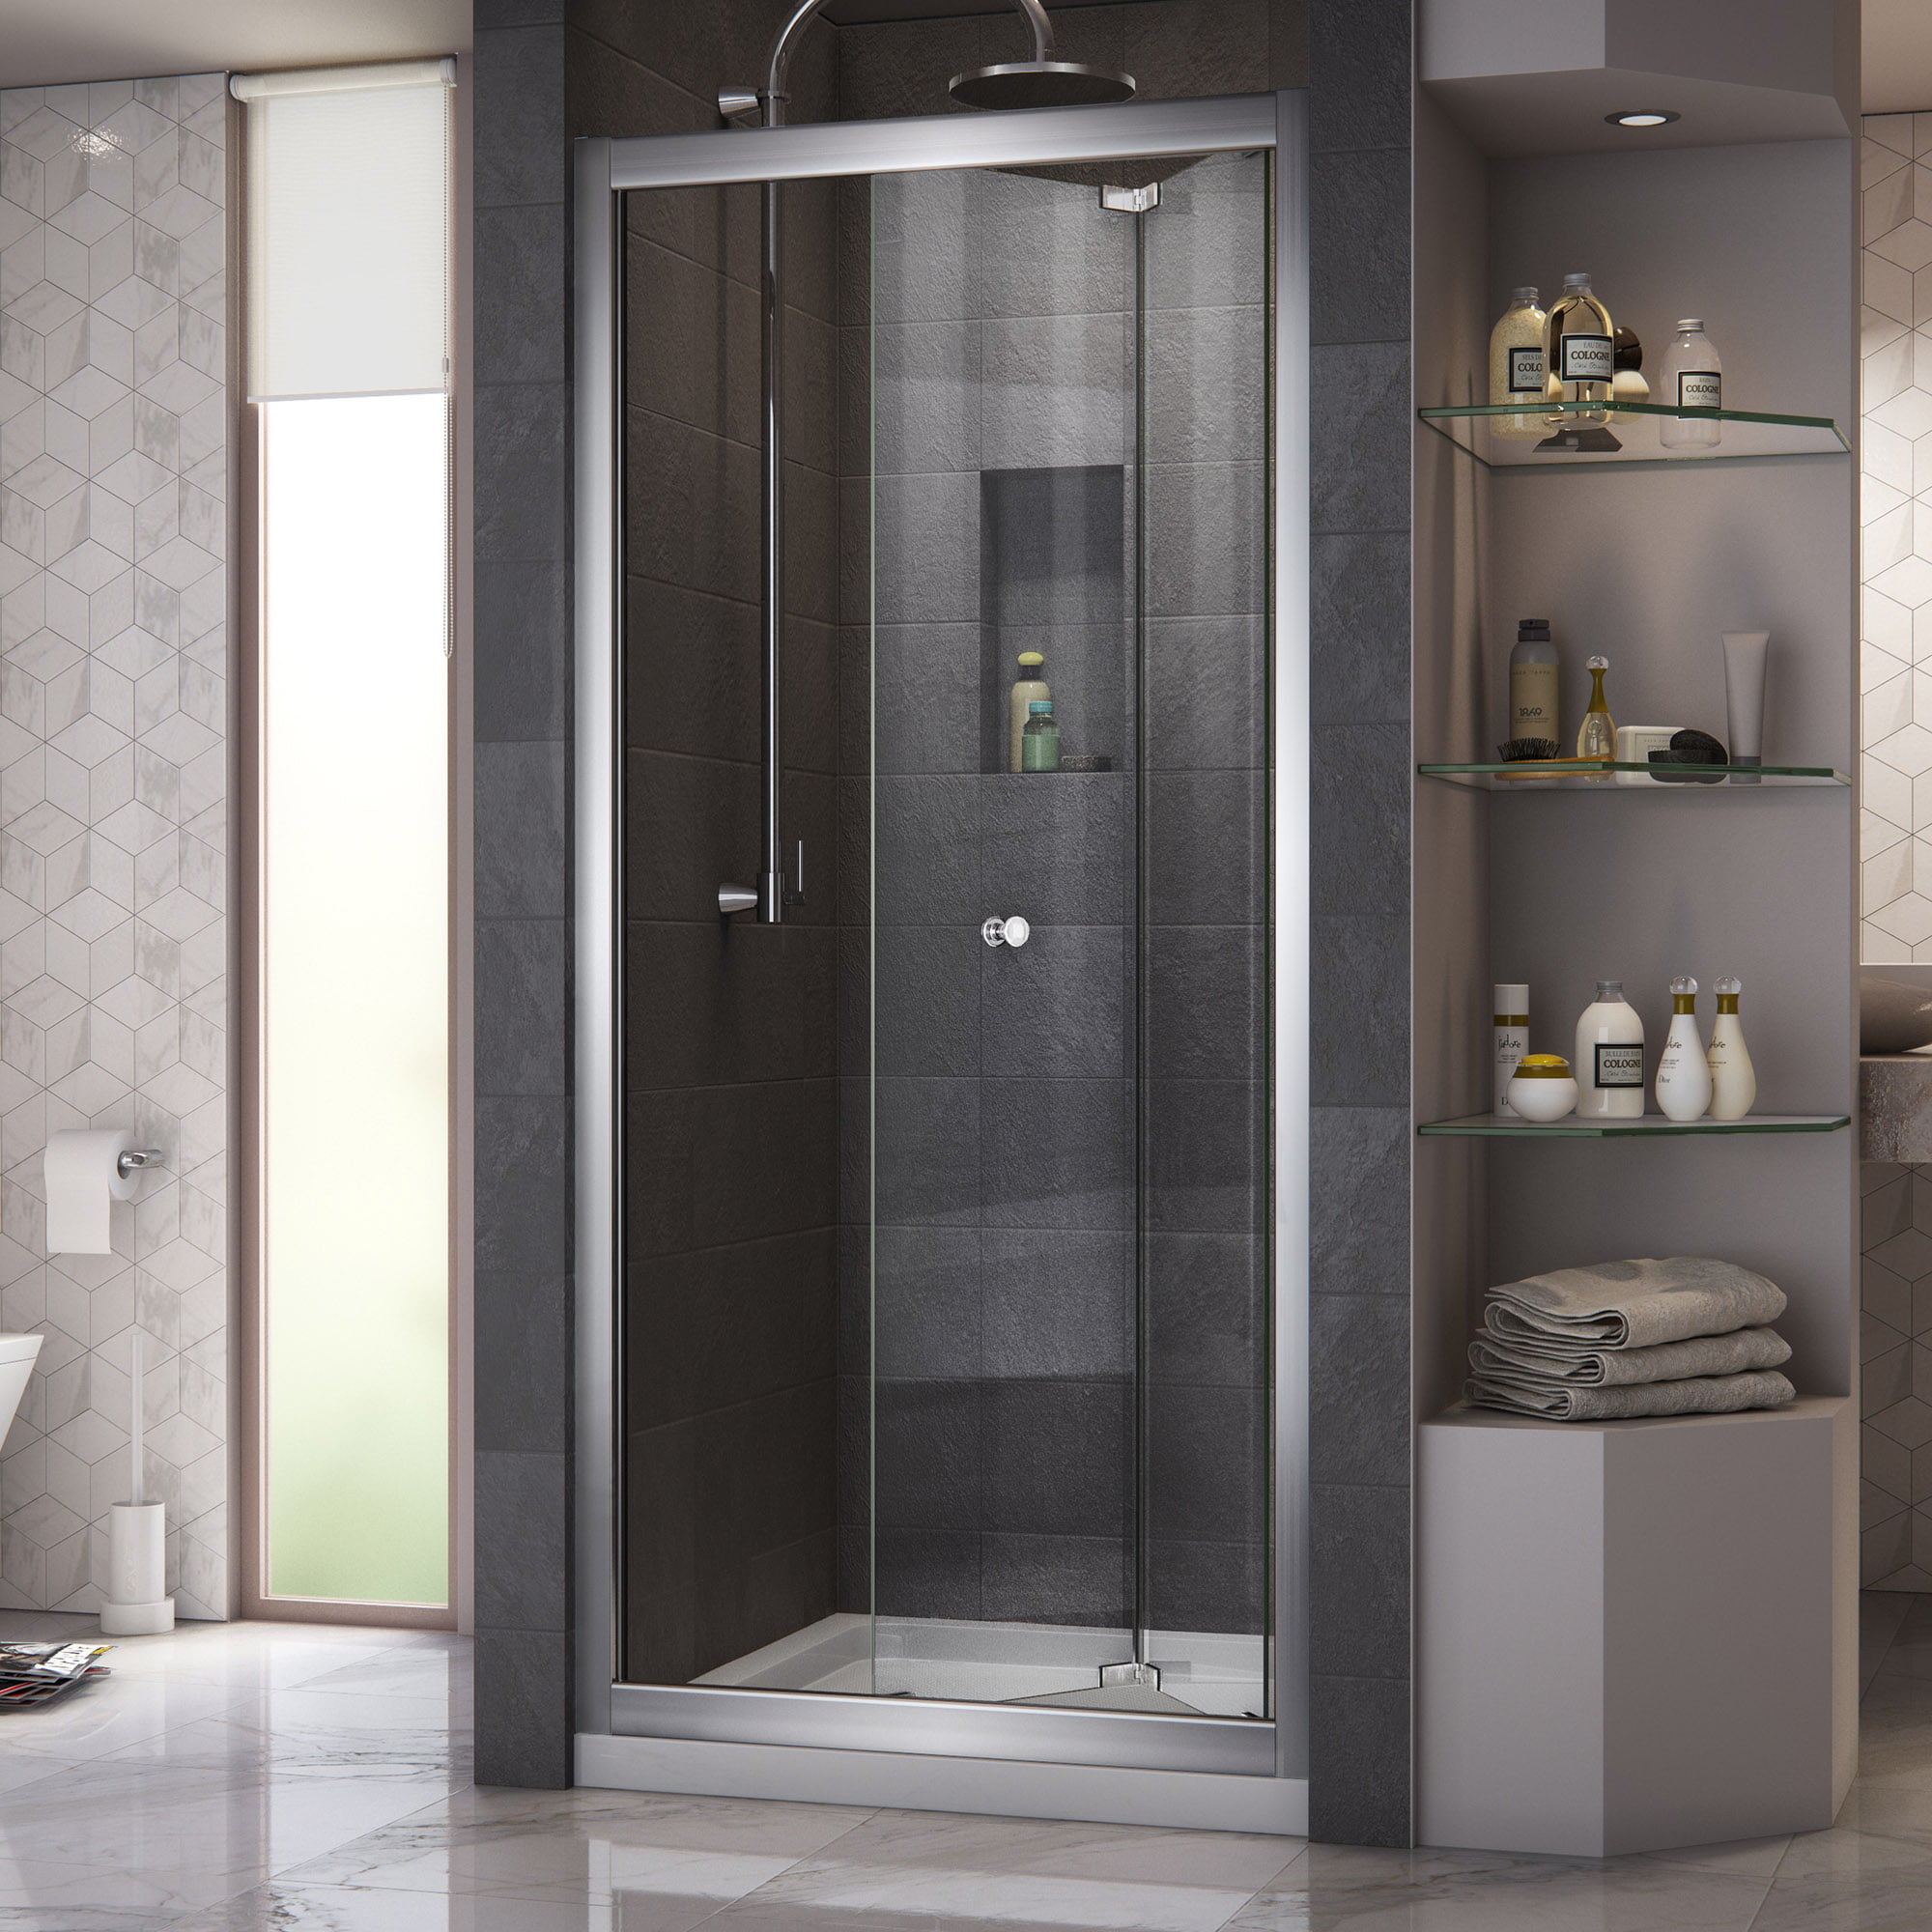 DreamLine Butterfly 32 in. D x 32 in. W x 74 3/4 in. H Sliding Bi-Fold Shower Door in Chrome with Center Drain Biscuit Base Kit